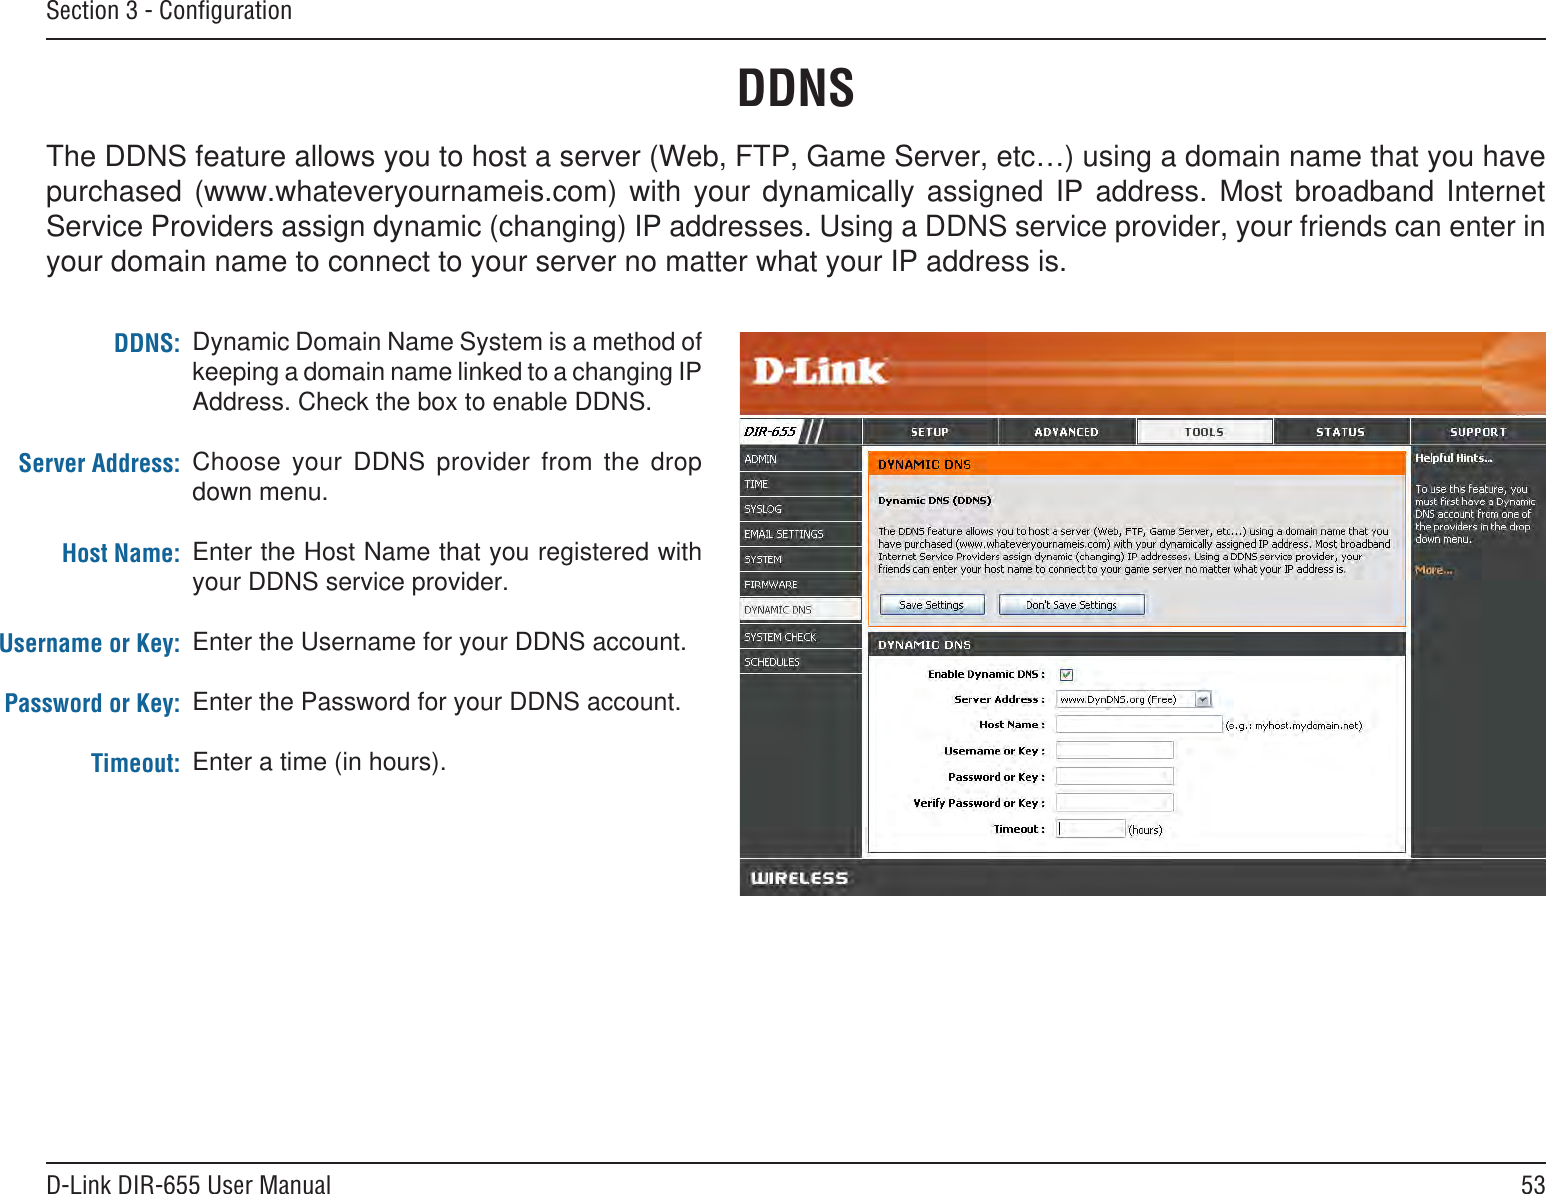 53D-Link DIR-655 User ManualSection 3 - ConﬁgurationDynamic Domain Name System is a method of keeping a domain name linked to a changing IP Address. Check the box to enable DDNS.Choose  your  DDNS  provider  from  the  drop down menu.Enter the Host Name that you registered with your DDNS service provider.Enter the Username for your DDNS account.Enter the Password for your DDNS account.Enter a time (in hours).DDNS:Server Address:Host Name:Username or Key:Password or Key:Timeout:DDNSThe DDNS feature allows you to host a server (Web, FTP, Game Server, etc…) using a domain name that you have purchased  (www.whateveryournameis.com)  with  your  dynamically  assigned  IP  address.  Most  broadband  Internet Service Providers assign dynamic (changing) IP addresses. Using a DDNS service provider, your friends can enter in your domain name to connect to your server no matter what your IP address is.